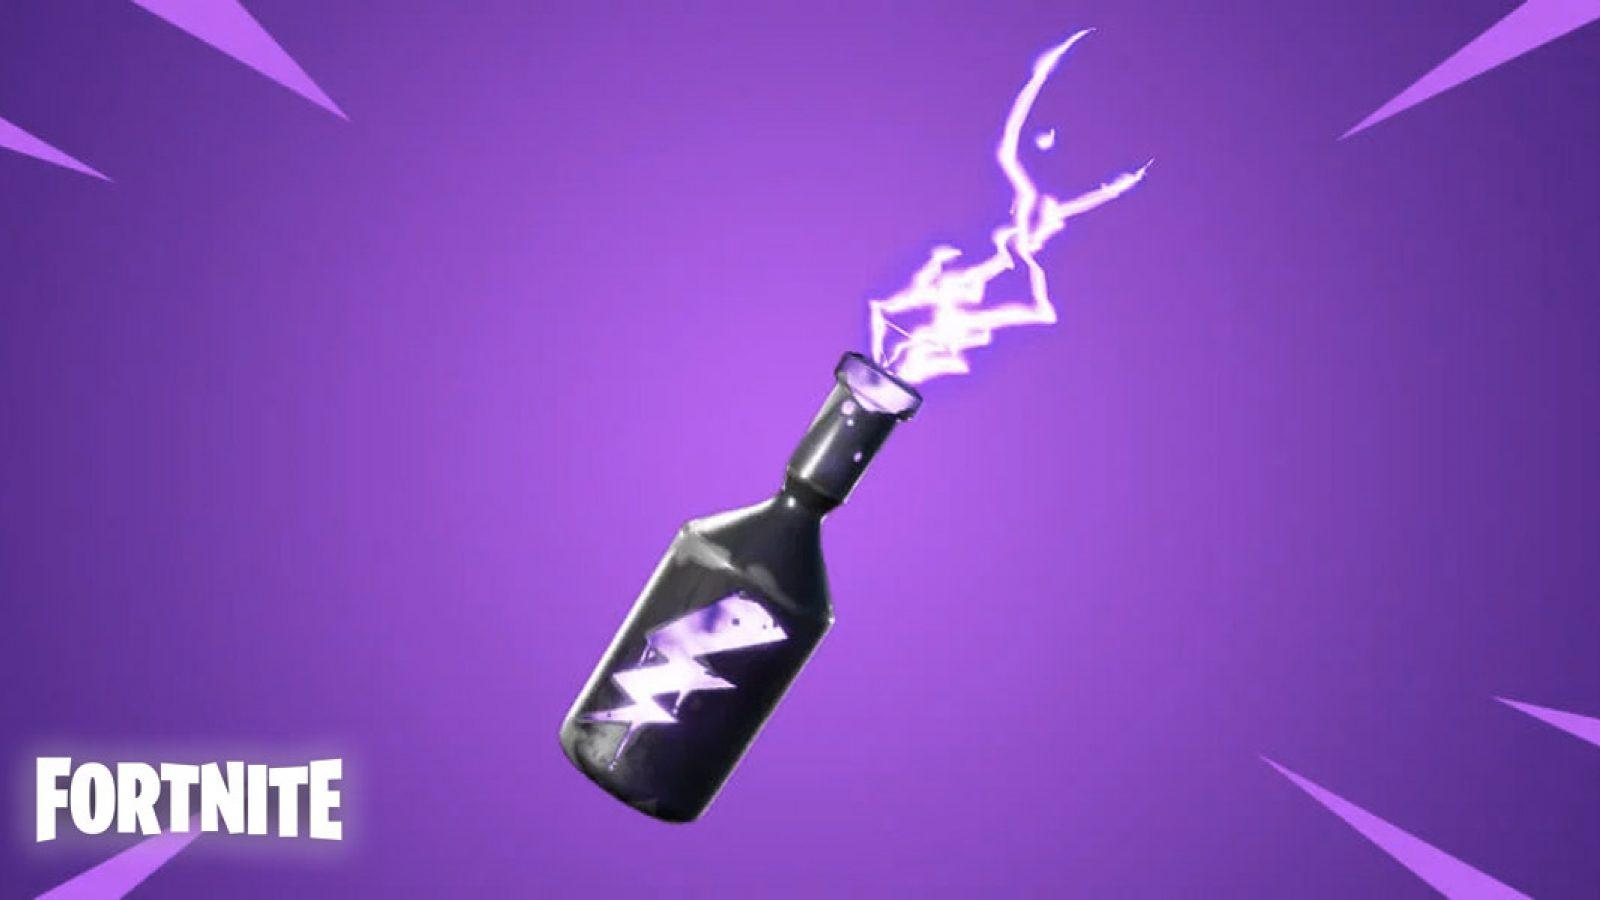 The 'Storm Flip' item is coming to Fortnite